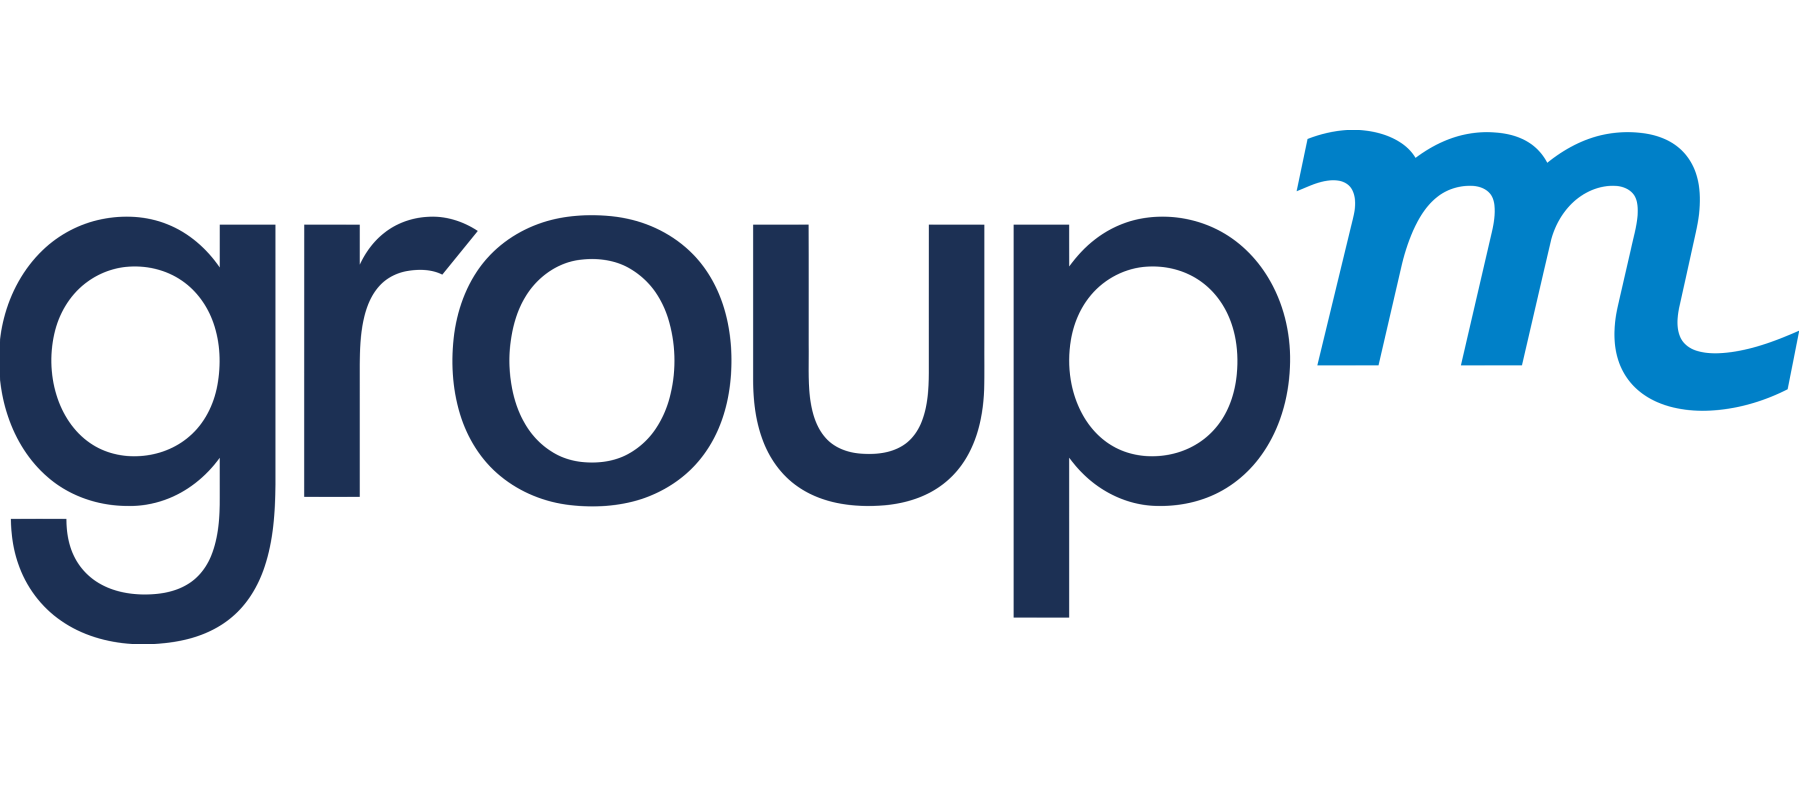 GroupM launches ad innovation accelerator to enhance engagement between advertisers and audiences